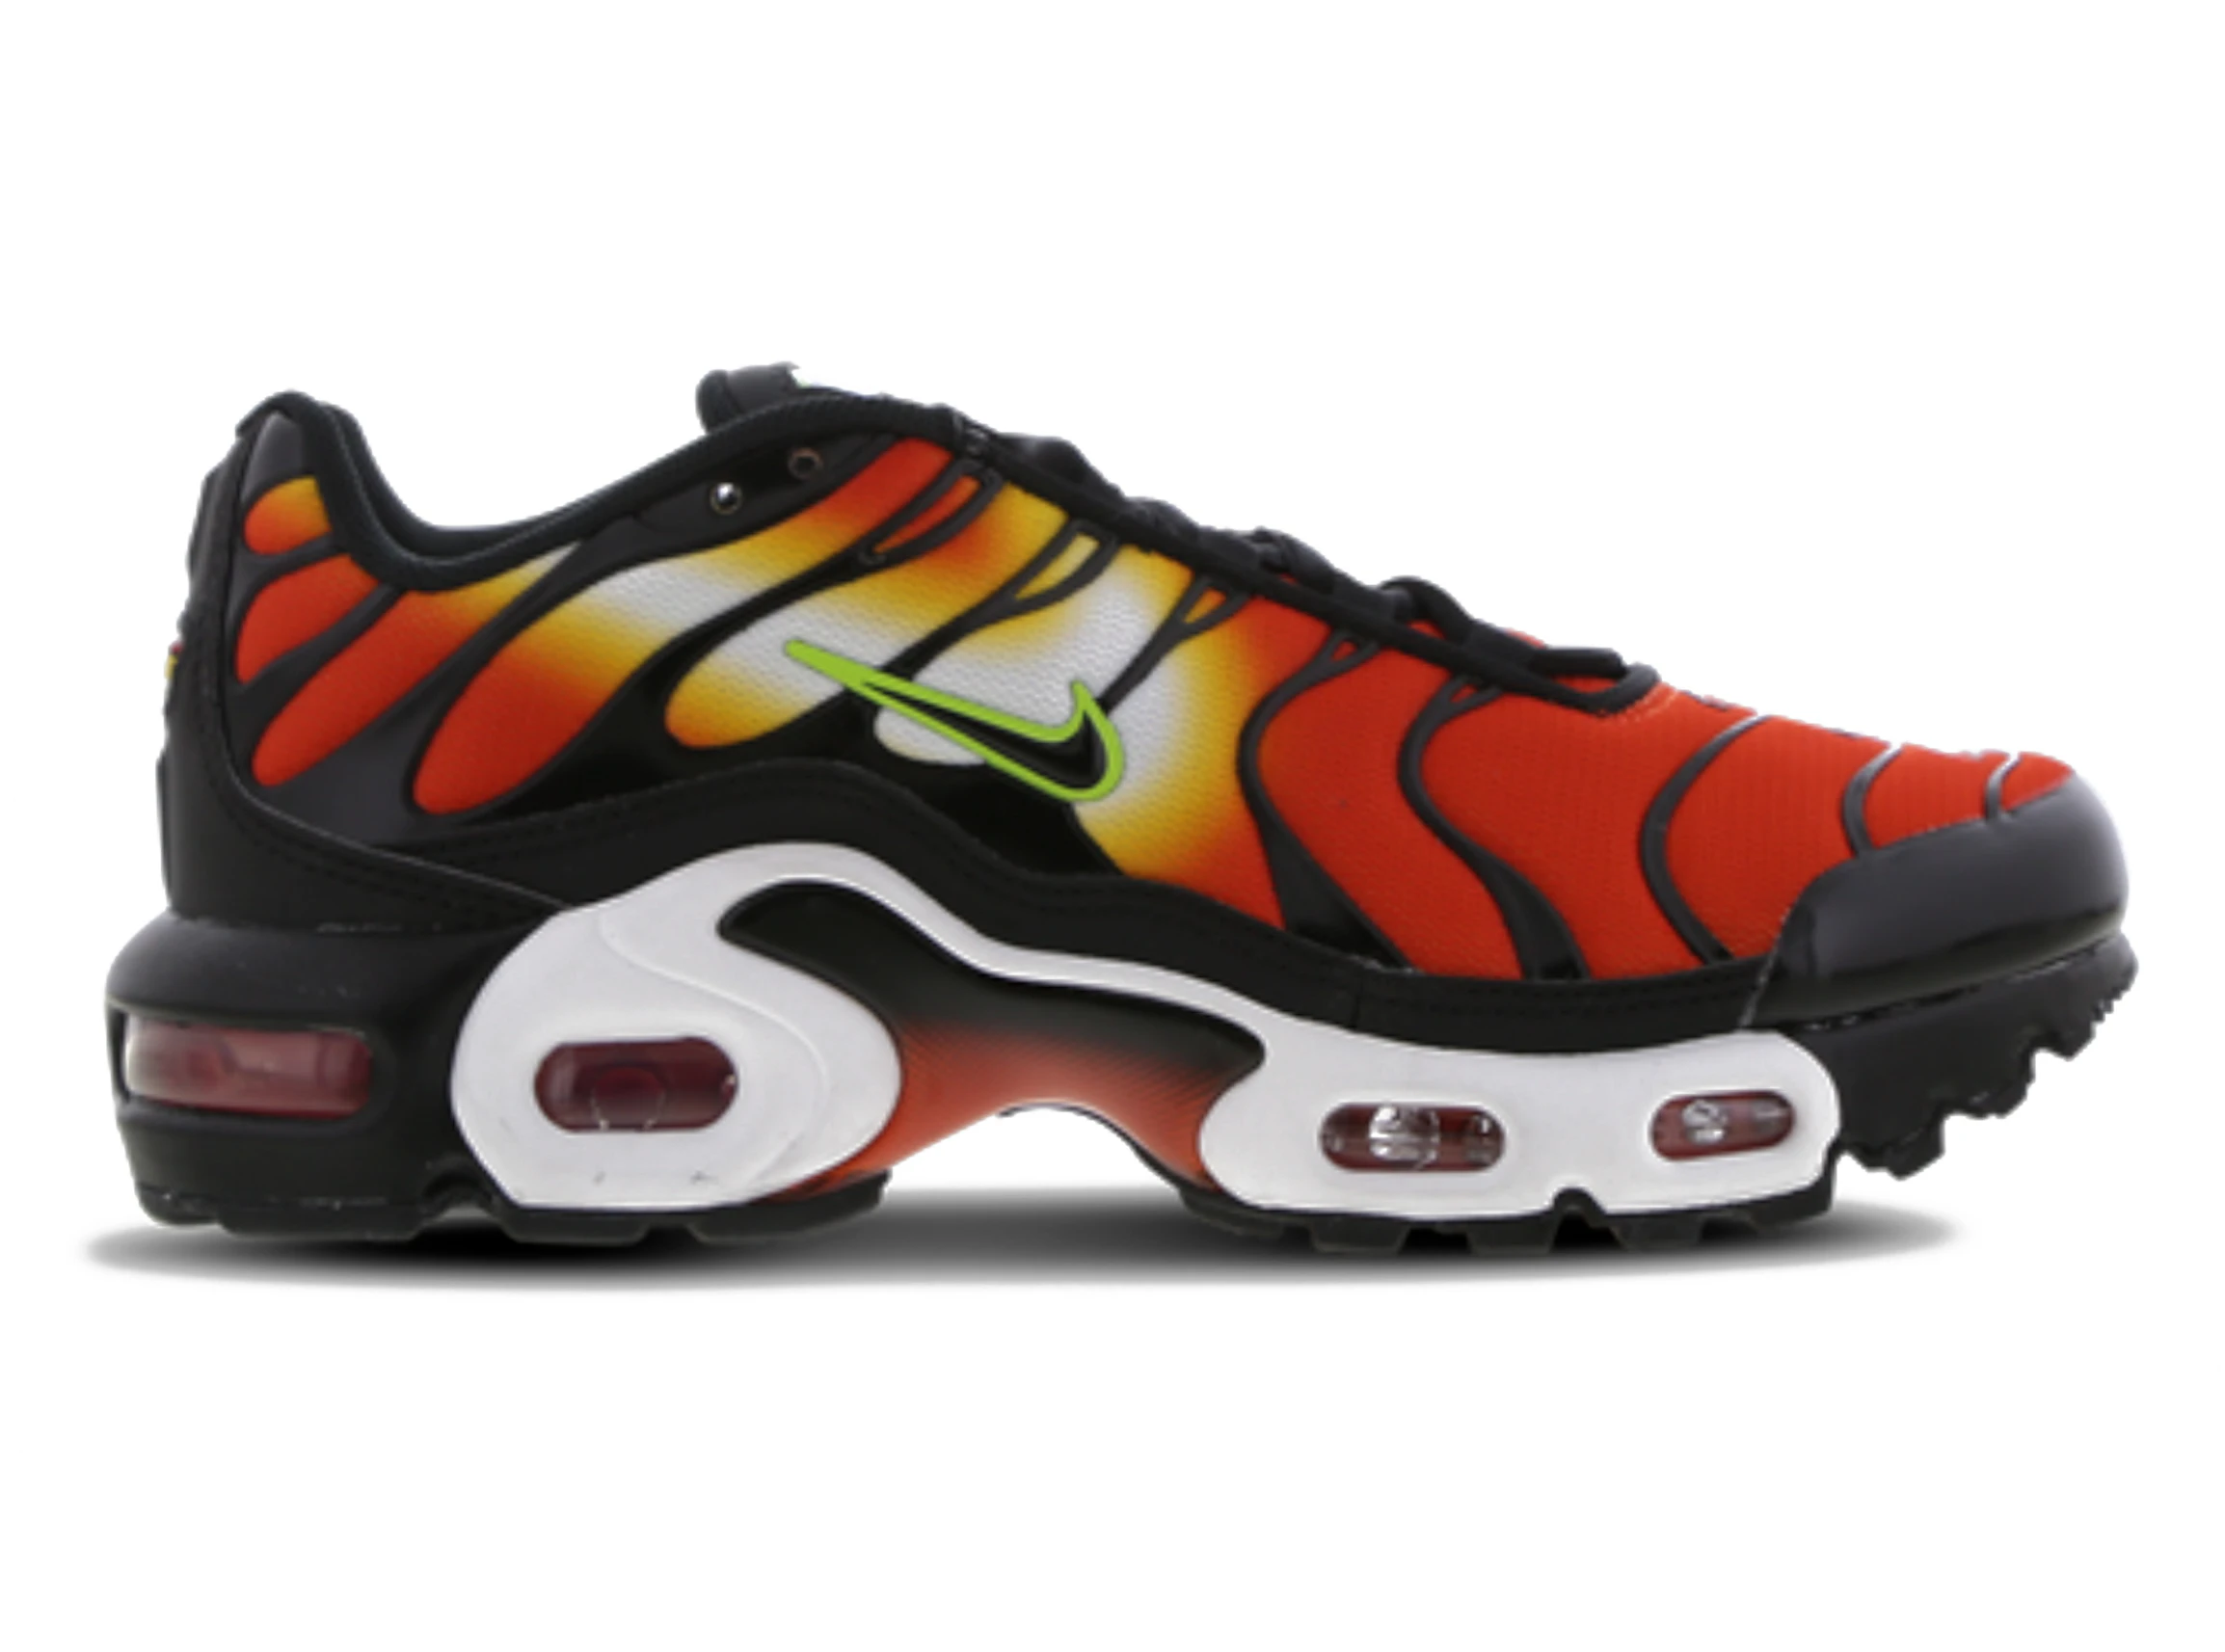 Nike Air Max Plus Sunset Yellow (2021) (GS) - DR8675-800 US